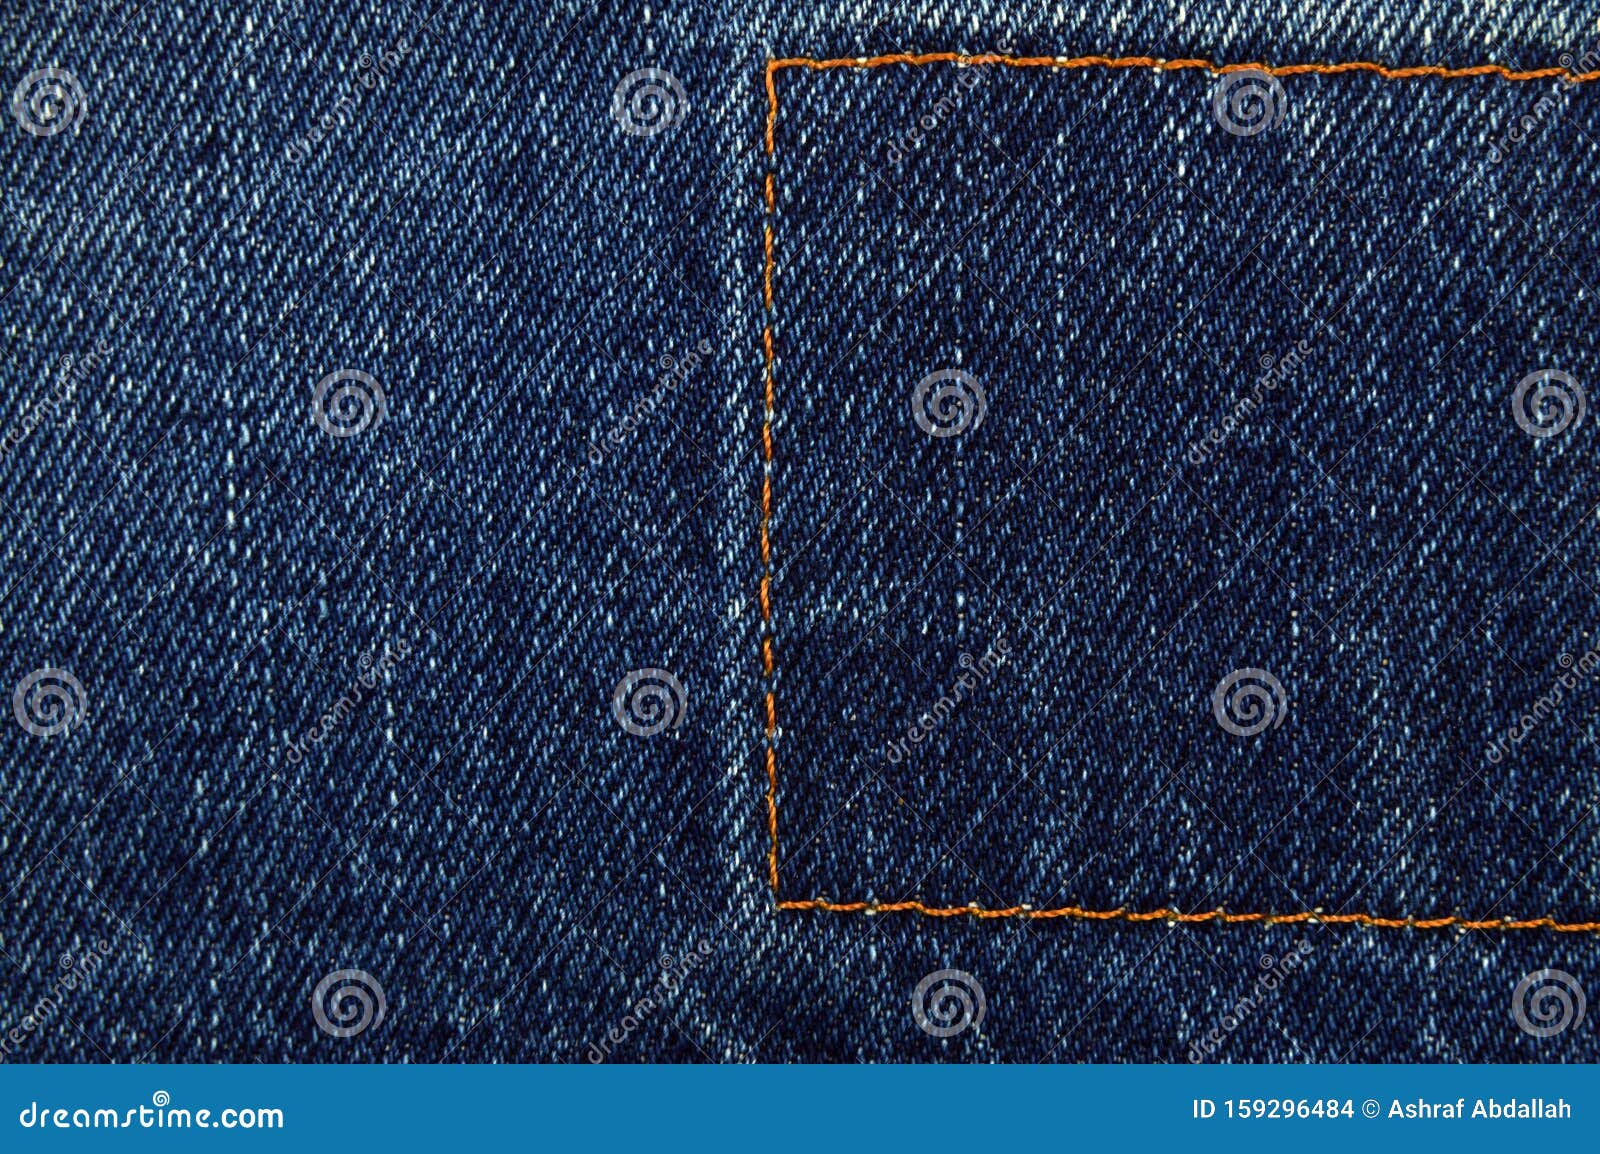 Abstract Textures Denim Jeans Material Closeup Stock Photo - Image of ...